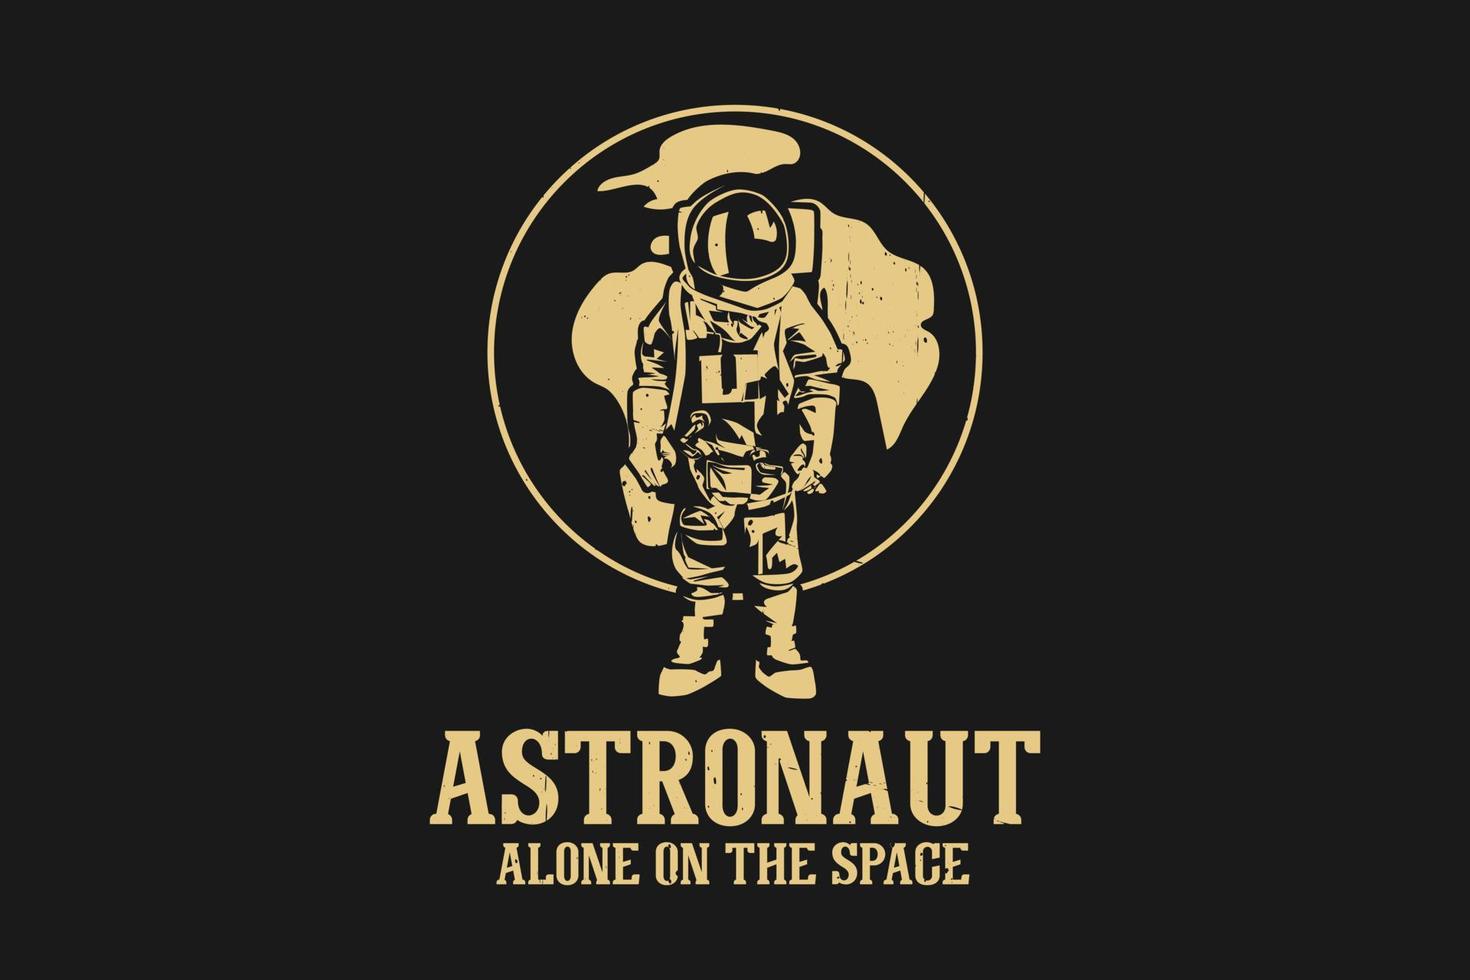 Astronaut alone on the space silhouette design vector